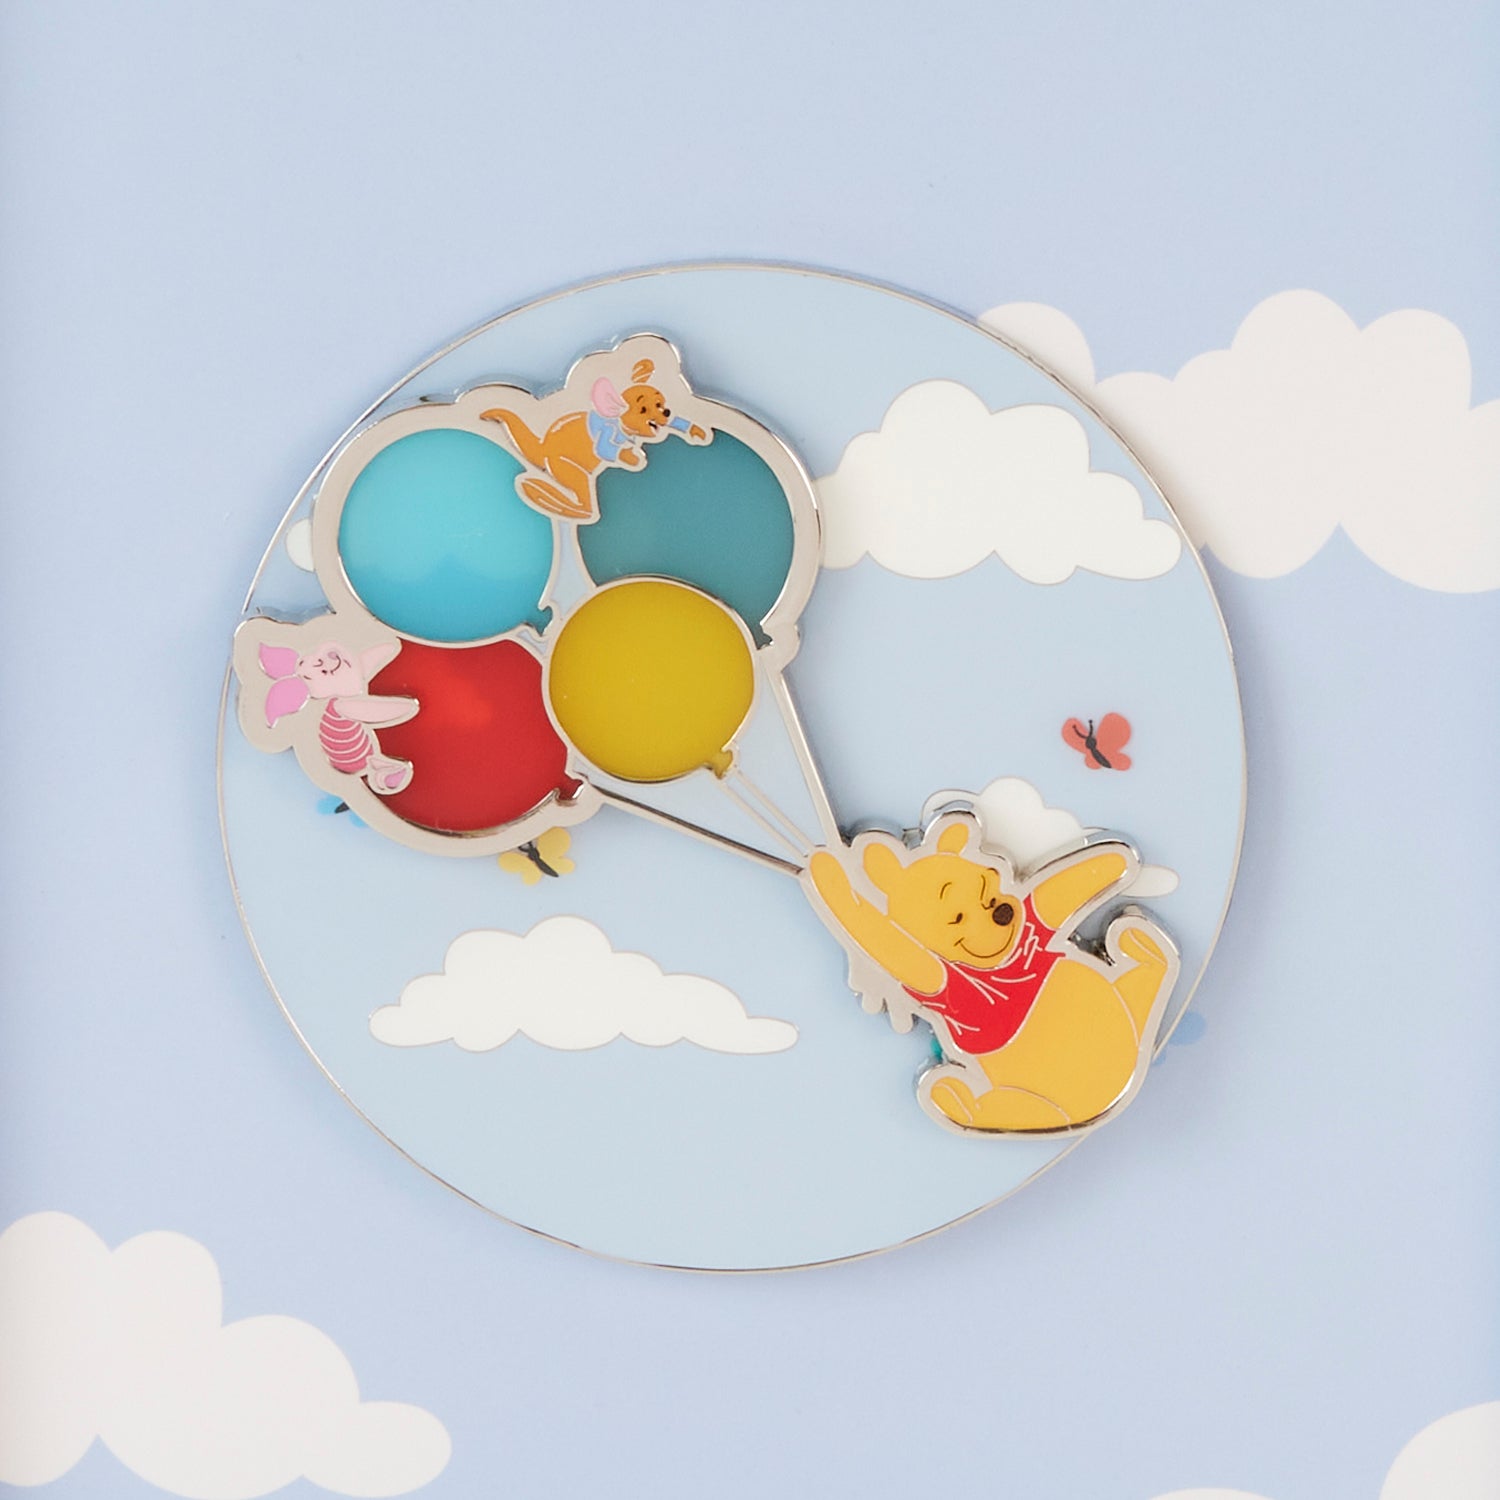 Loungefly x Disney Winnie The Pooh and Friends Balloons 3 Inch Sliding Pin